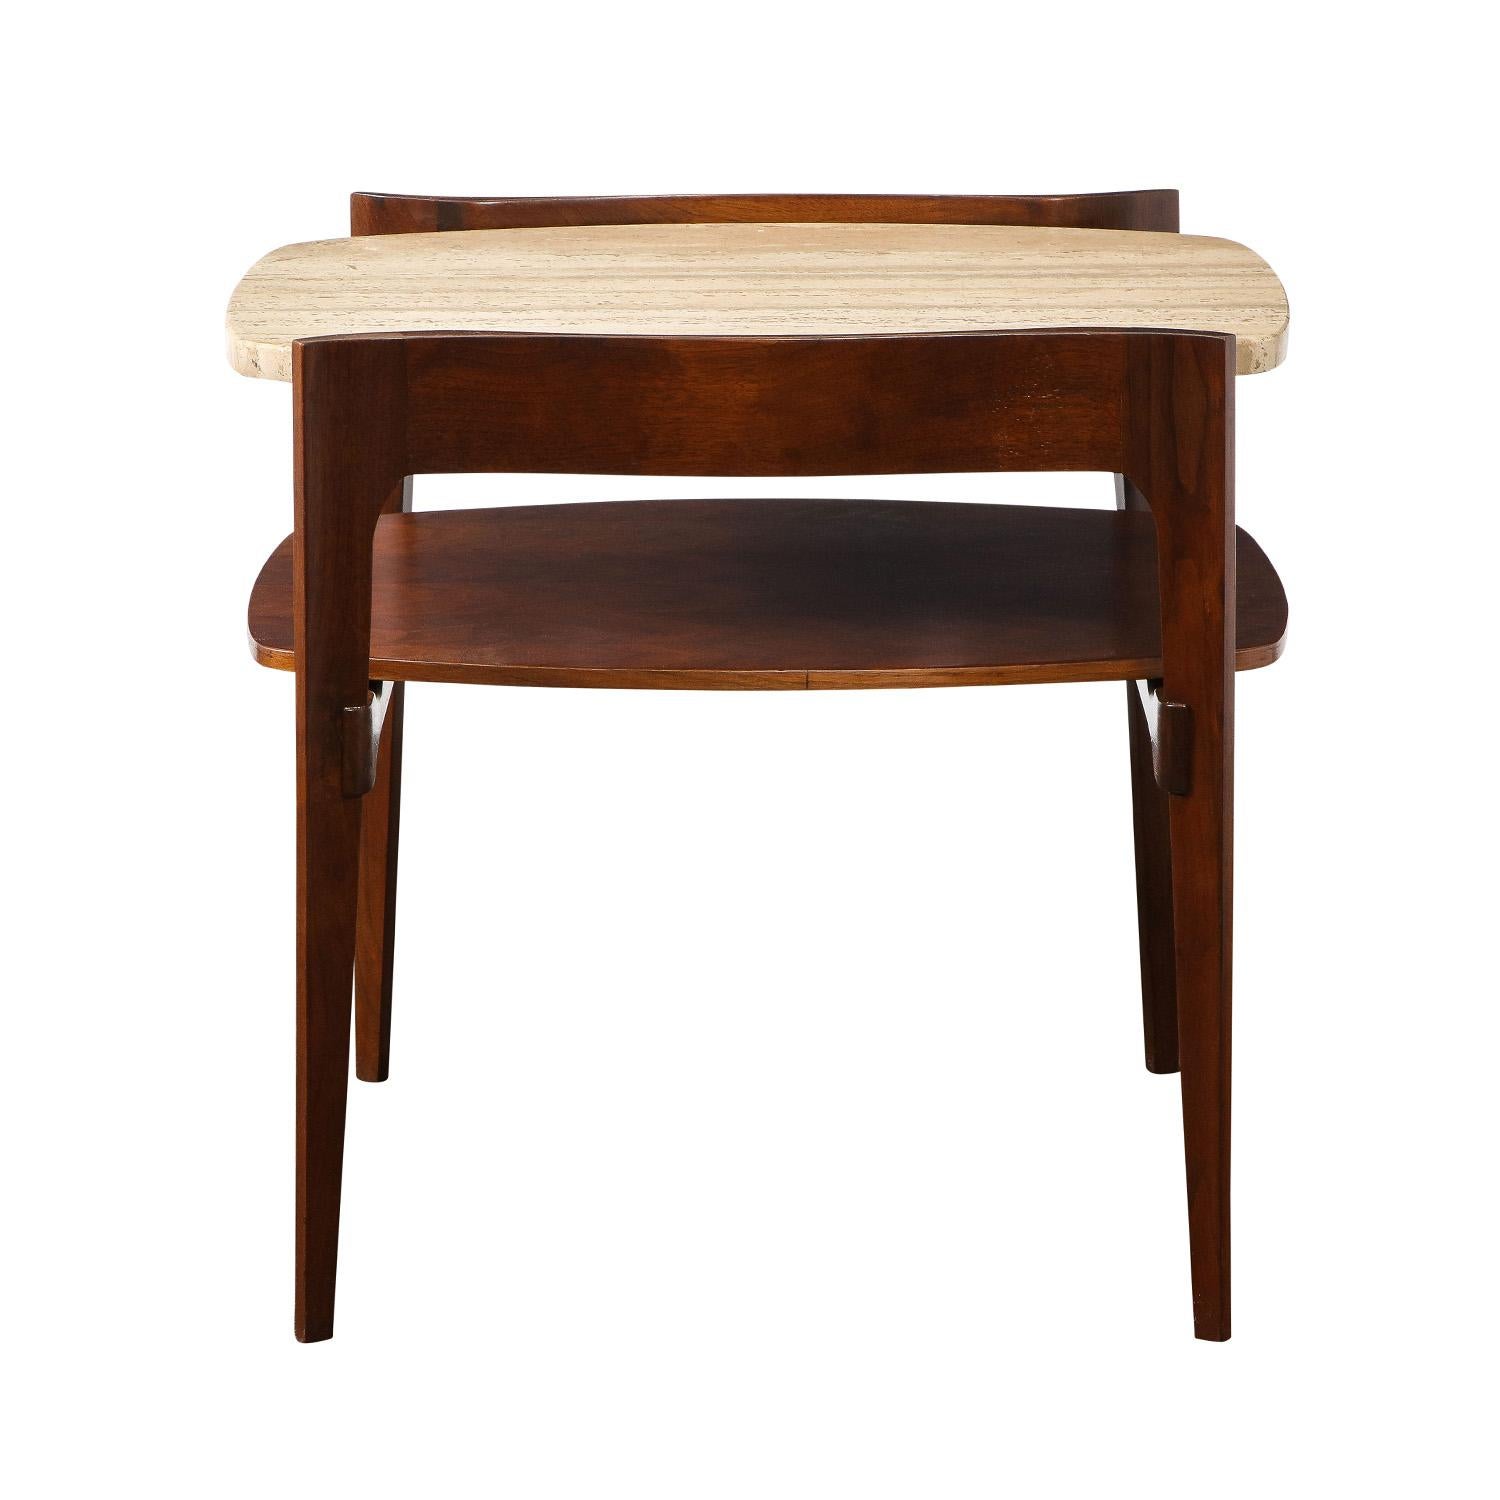 Elegant 2-tier side table in walnut with inset travertine top by Bertha Schaefer for R. Singer & Sons, American 1950's. This table has been completely refinished.